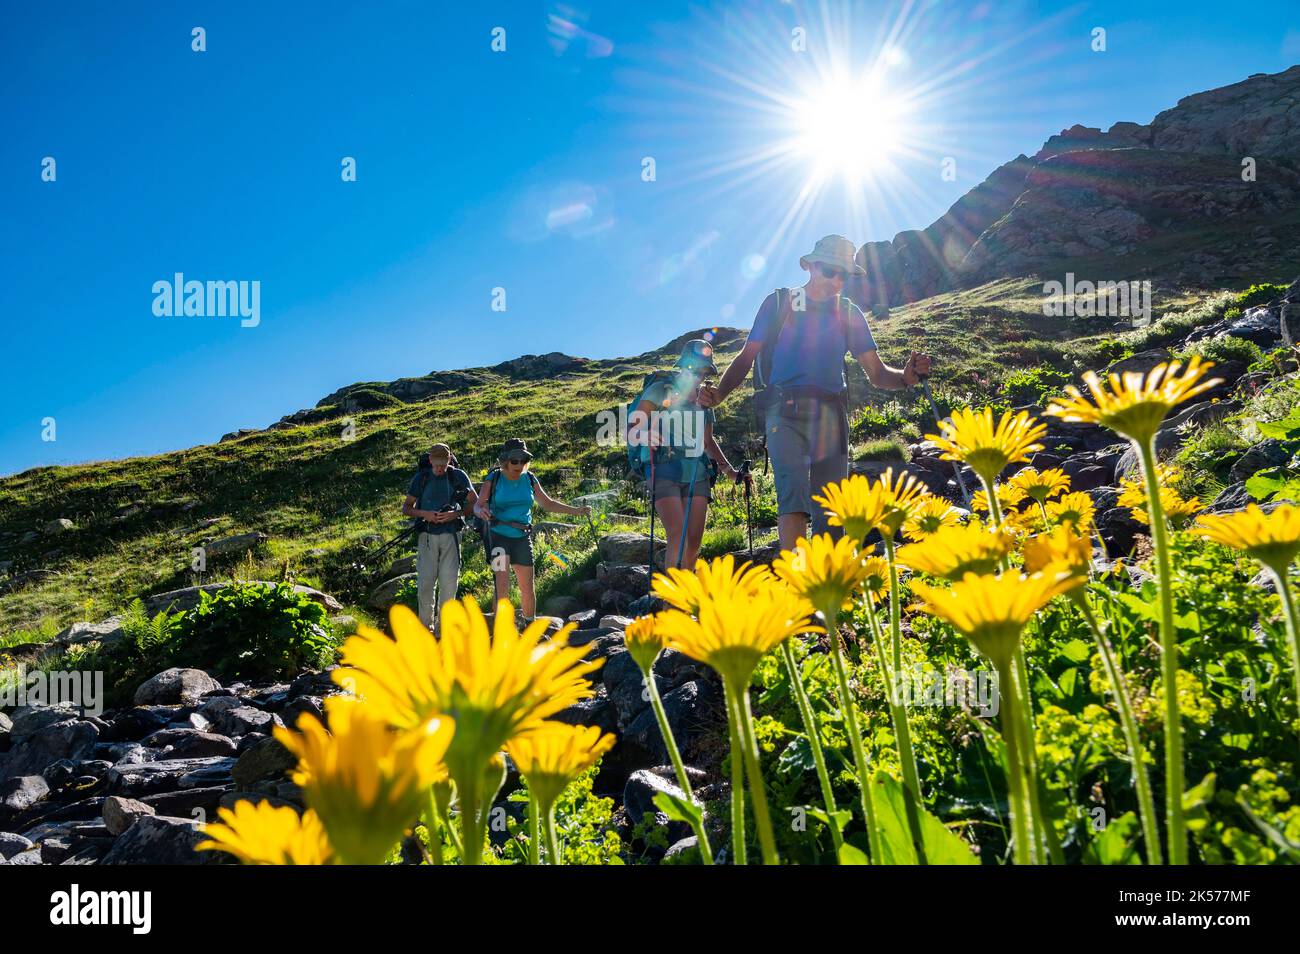 France, Savoie, Valmeinier, Thabor massif, trek around the Thabor, group of hikers in the Bissorte valley and Doronic flowers Stock Photo